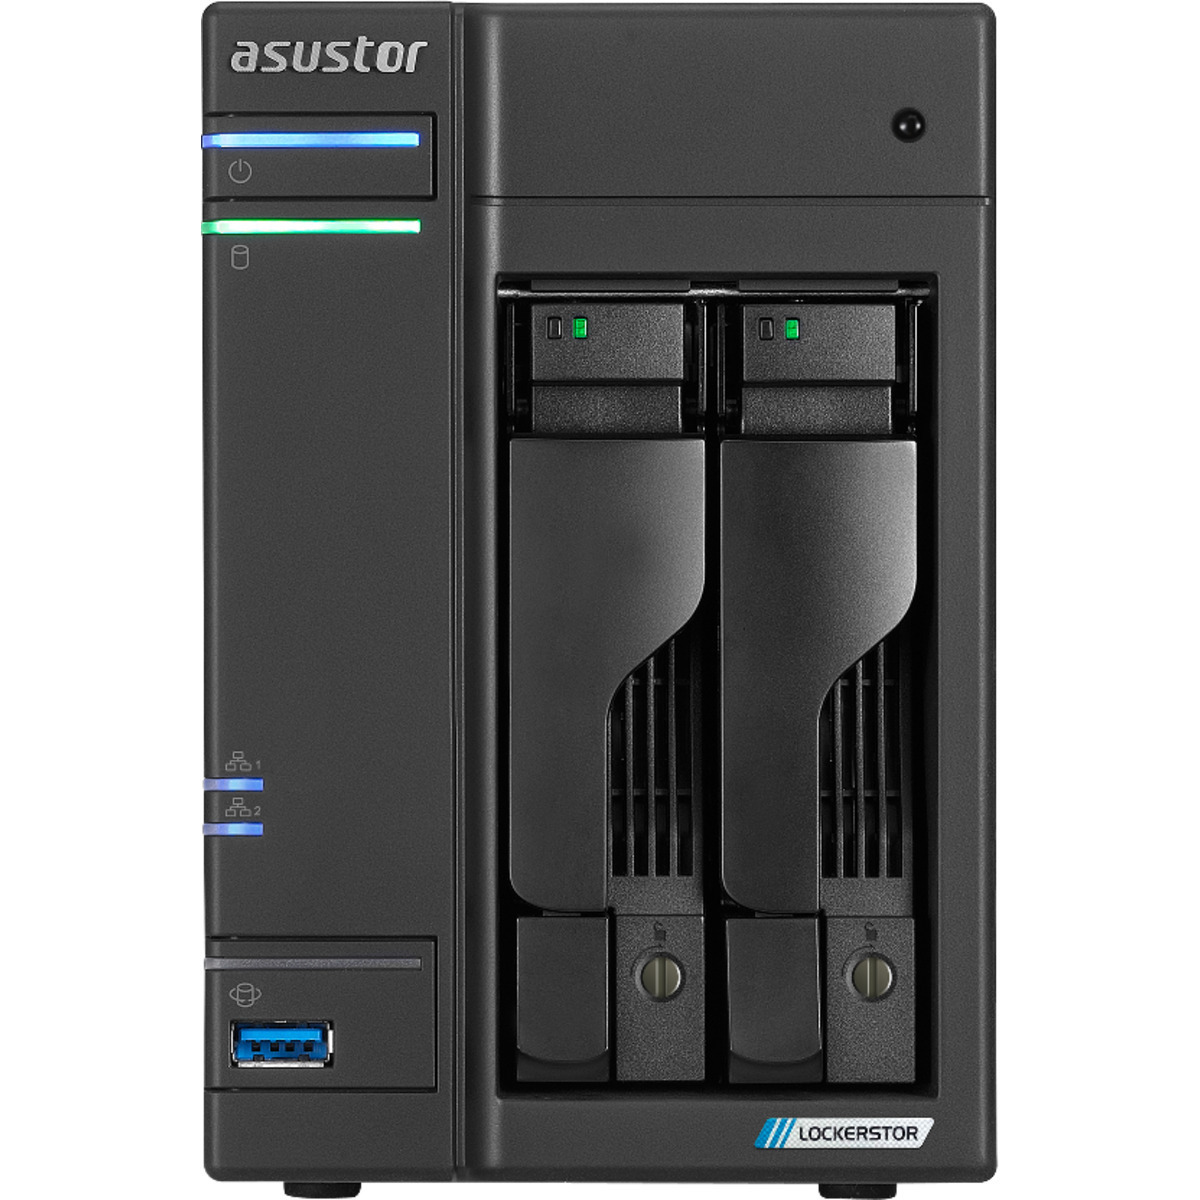 buy $1174 ASUSTOR LOCKERSTOR 2 Gen2 AS6702T 24tb Desktop NAS - Network Attached Storage Device 2x12000gb Seagate IronWolf Pro ST12000NT001 3.5 7200rpm SATA 6Gb/s HDD NAS Class Drives Installed - Burn-In Tested - FREE RAM UPGRADE - nas headquarters buy network attached storage server device das new raid-5 free shipping simply usa LOCKERSTOR 2 Gen2 AS6702T